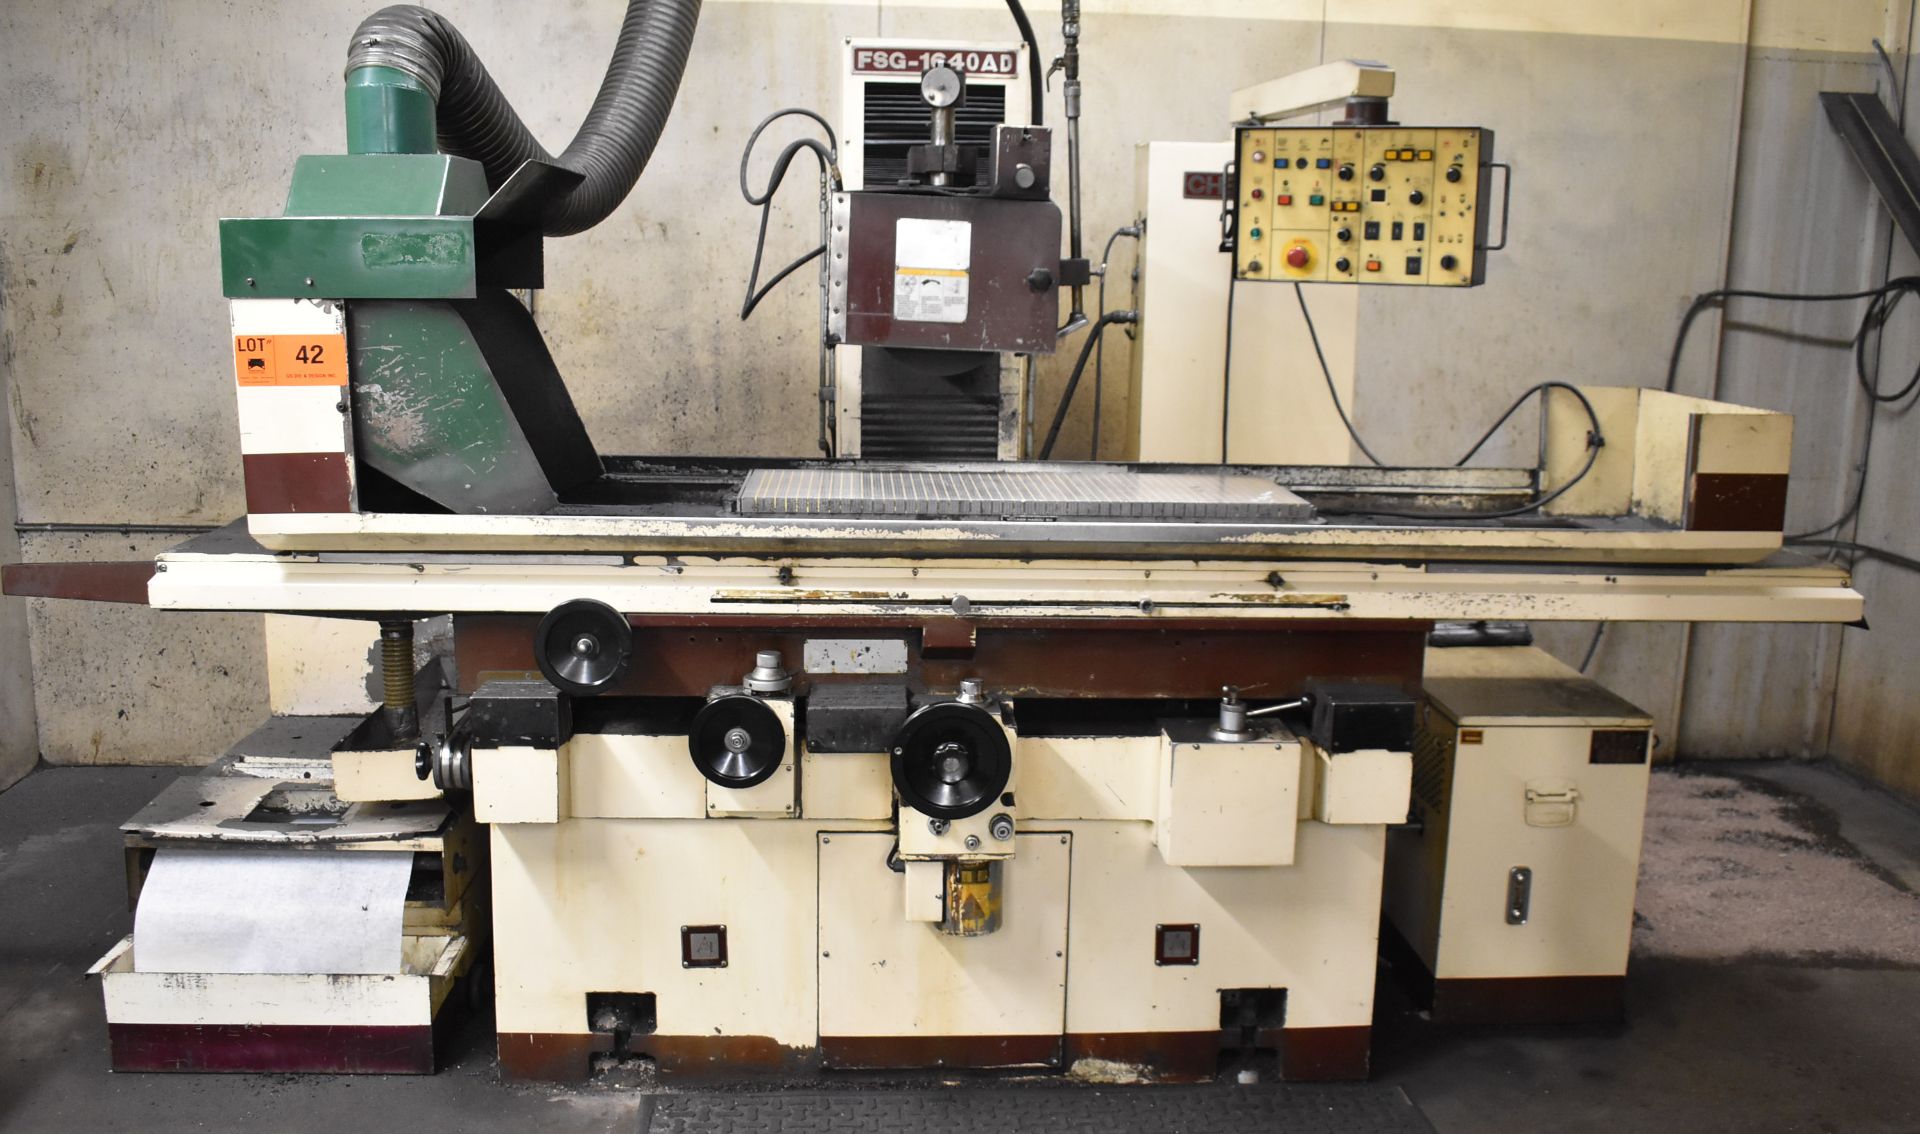 CHEVALIER FSG-1640AD HYDRAULIC SURFACE GRINDER WITH WALKER HAGOU 16"X40" ELECTROMAGNETIC CHUCK, - Image 3 of 14